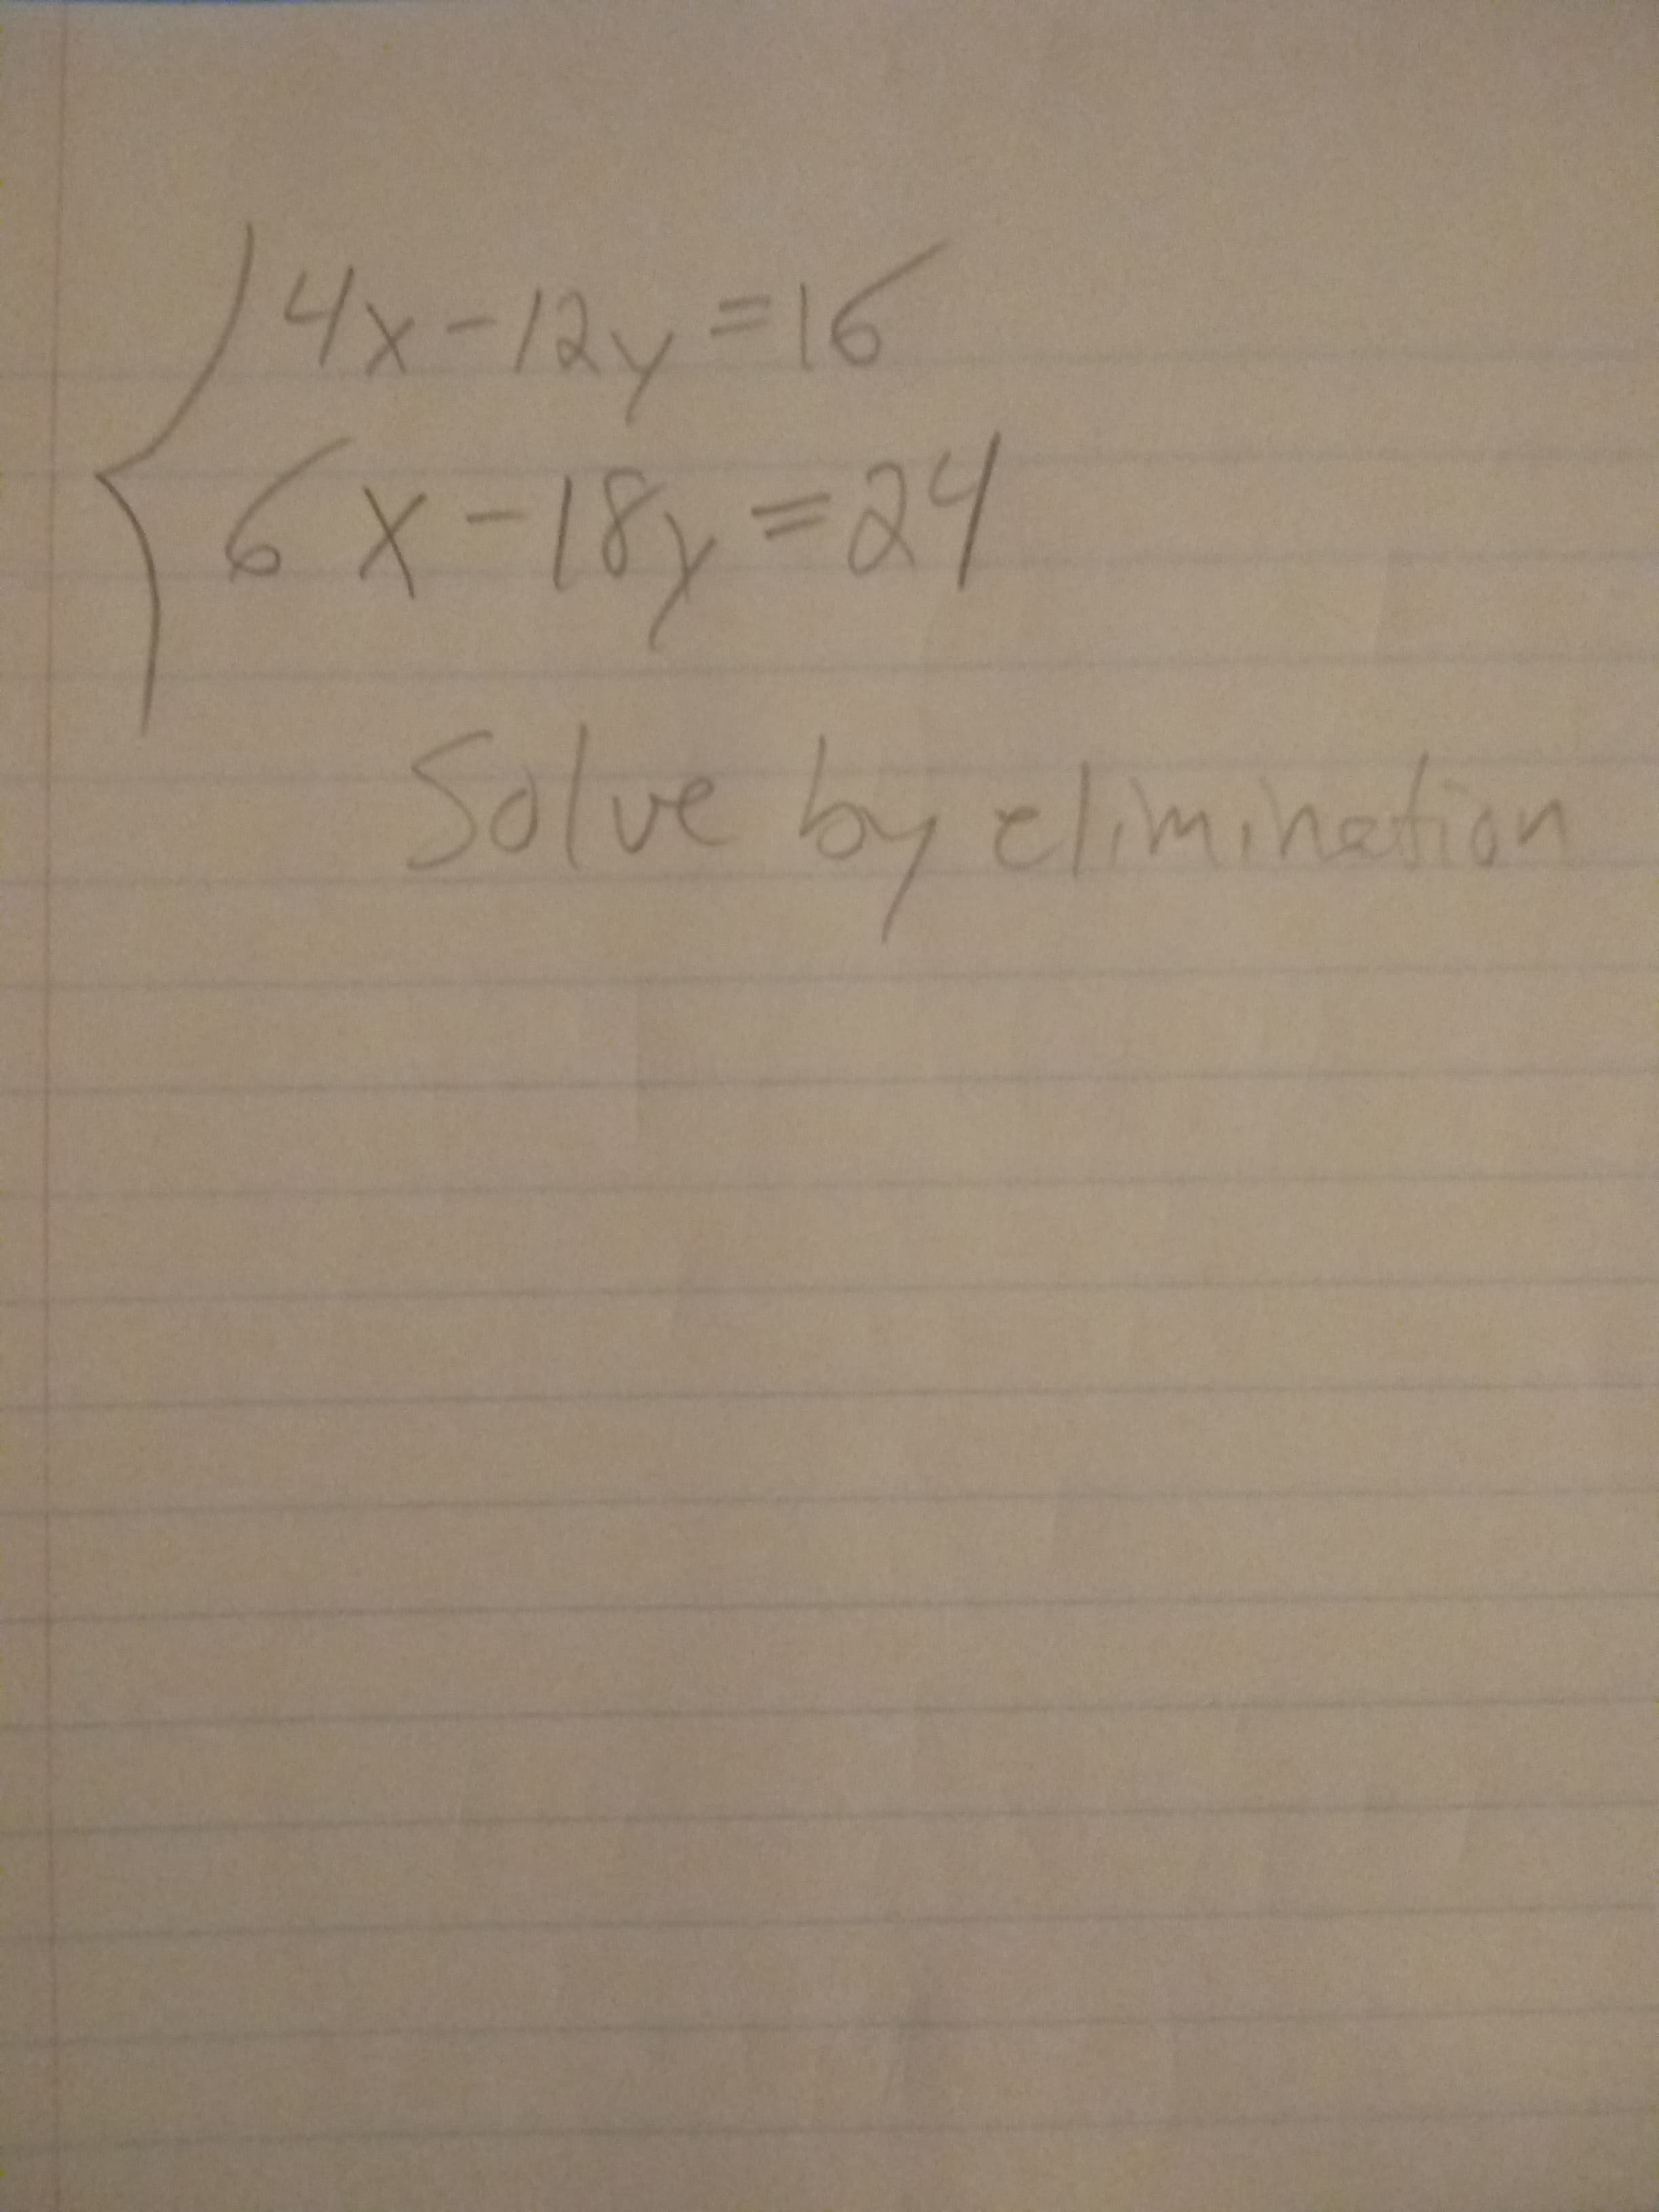 14x-12y=16
Solve by elimination
